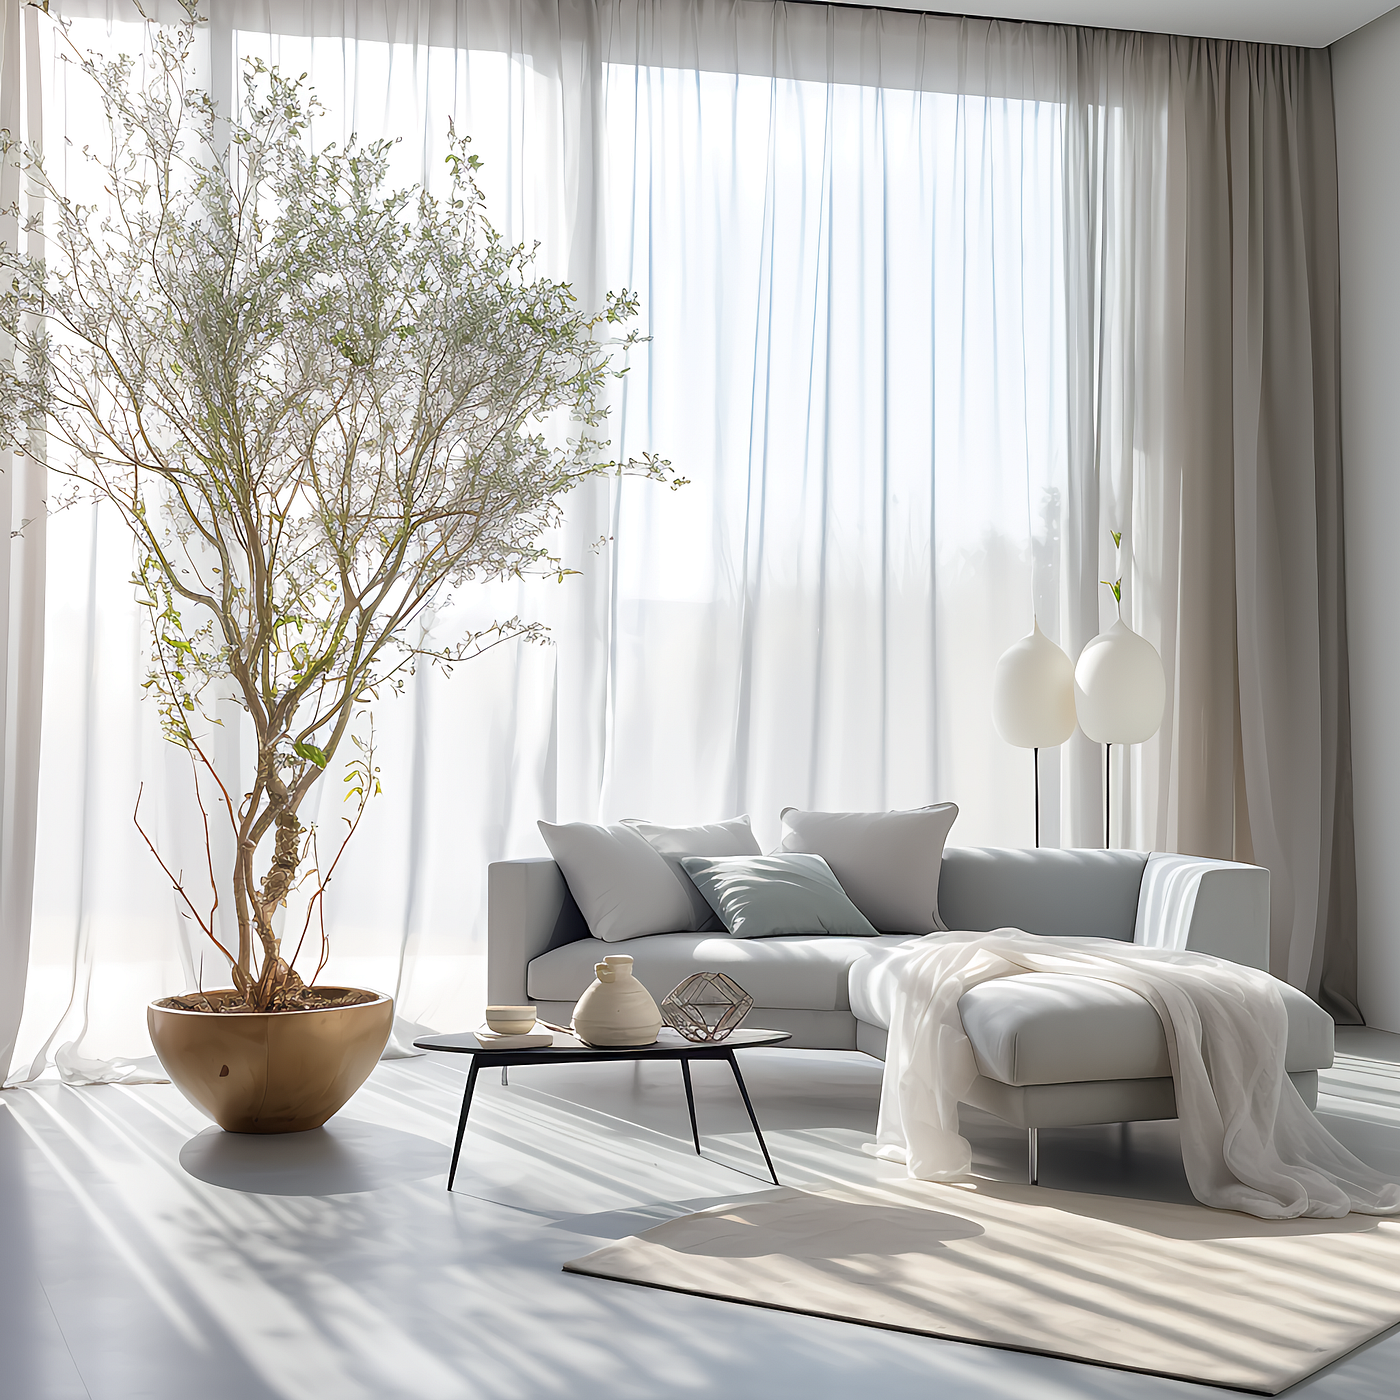 Planning to Shop Curtains for Your Living Room Interior Design? Let The KAP  Designs Help You Choose the Perfect Fit!”, by The KAP Designs